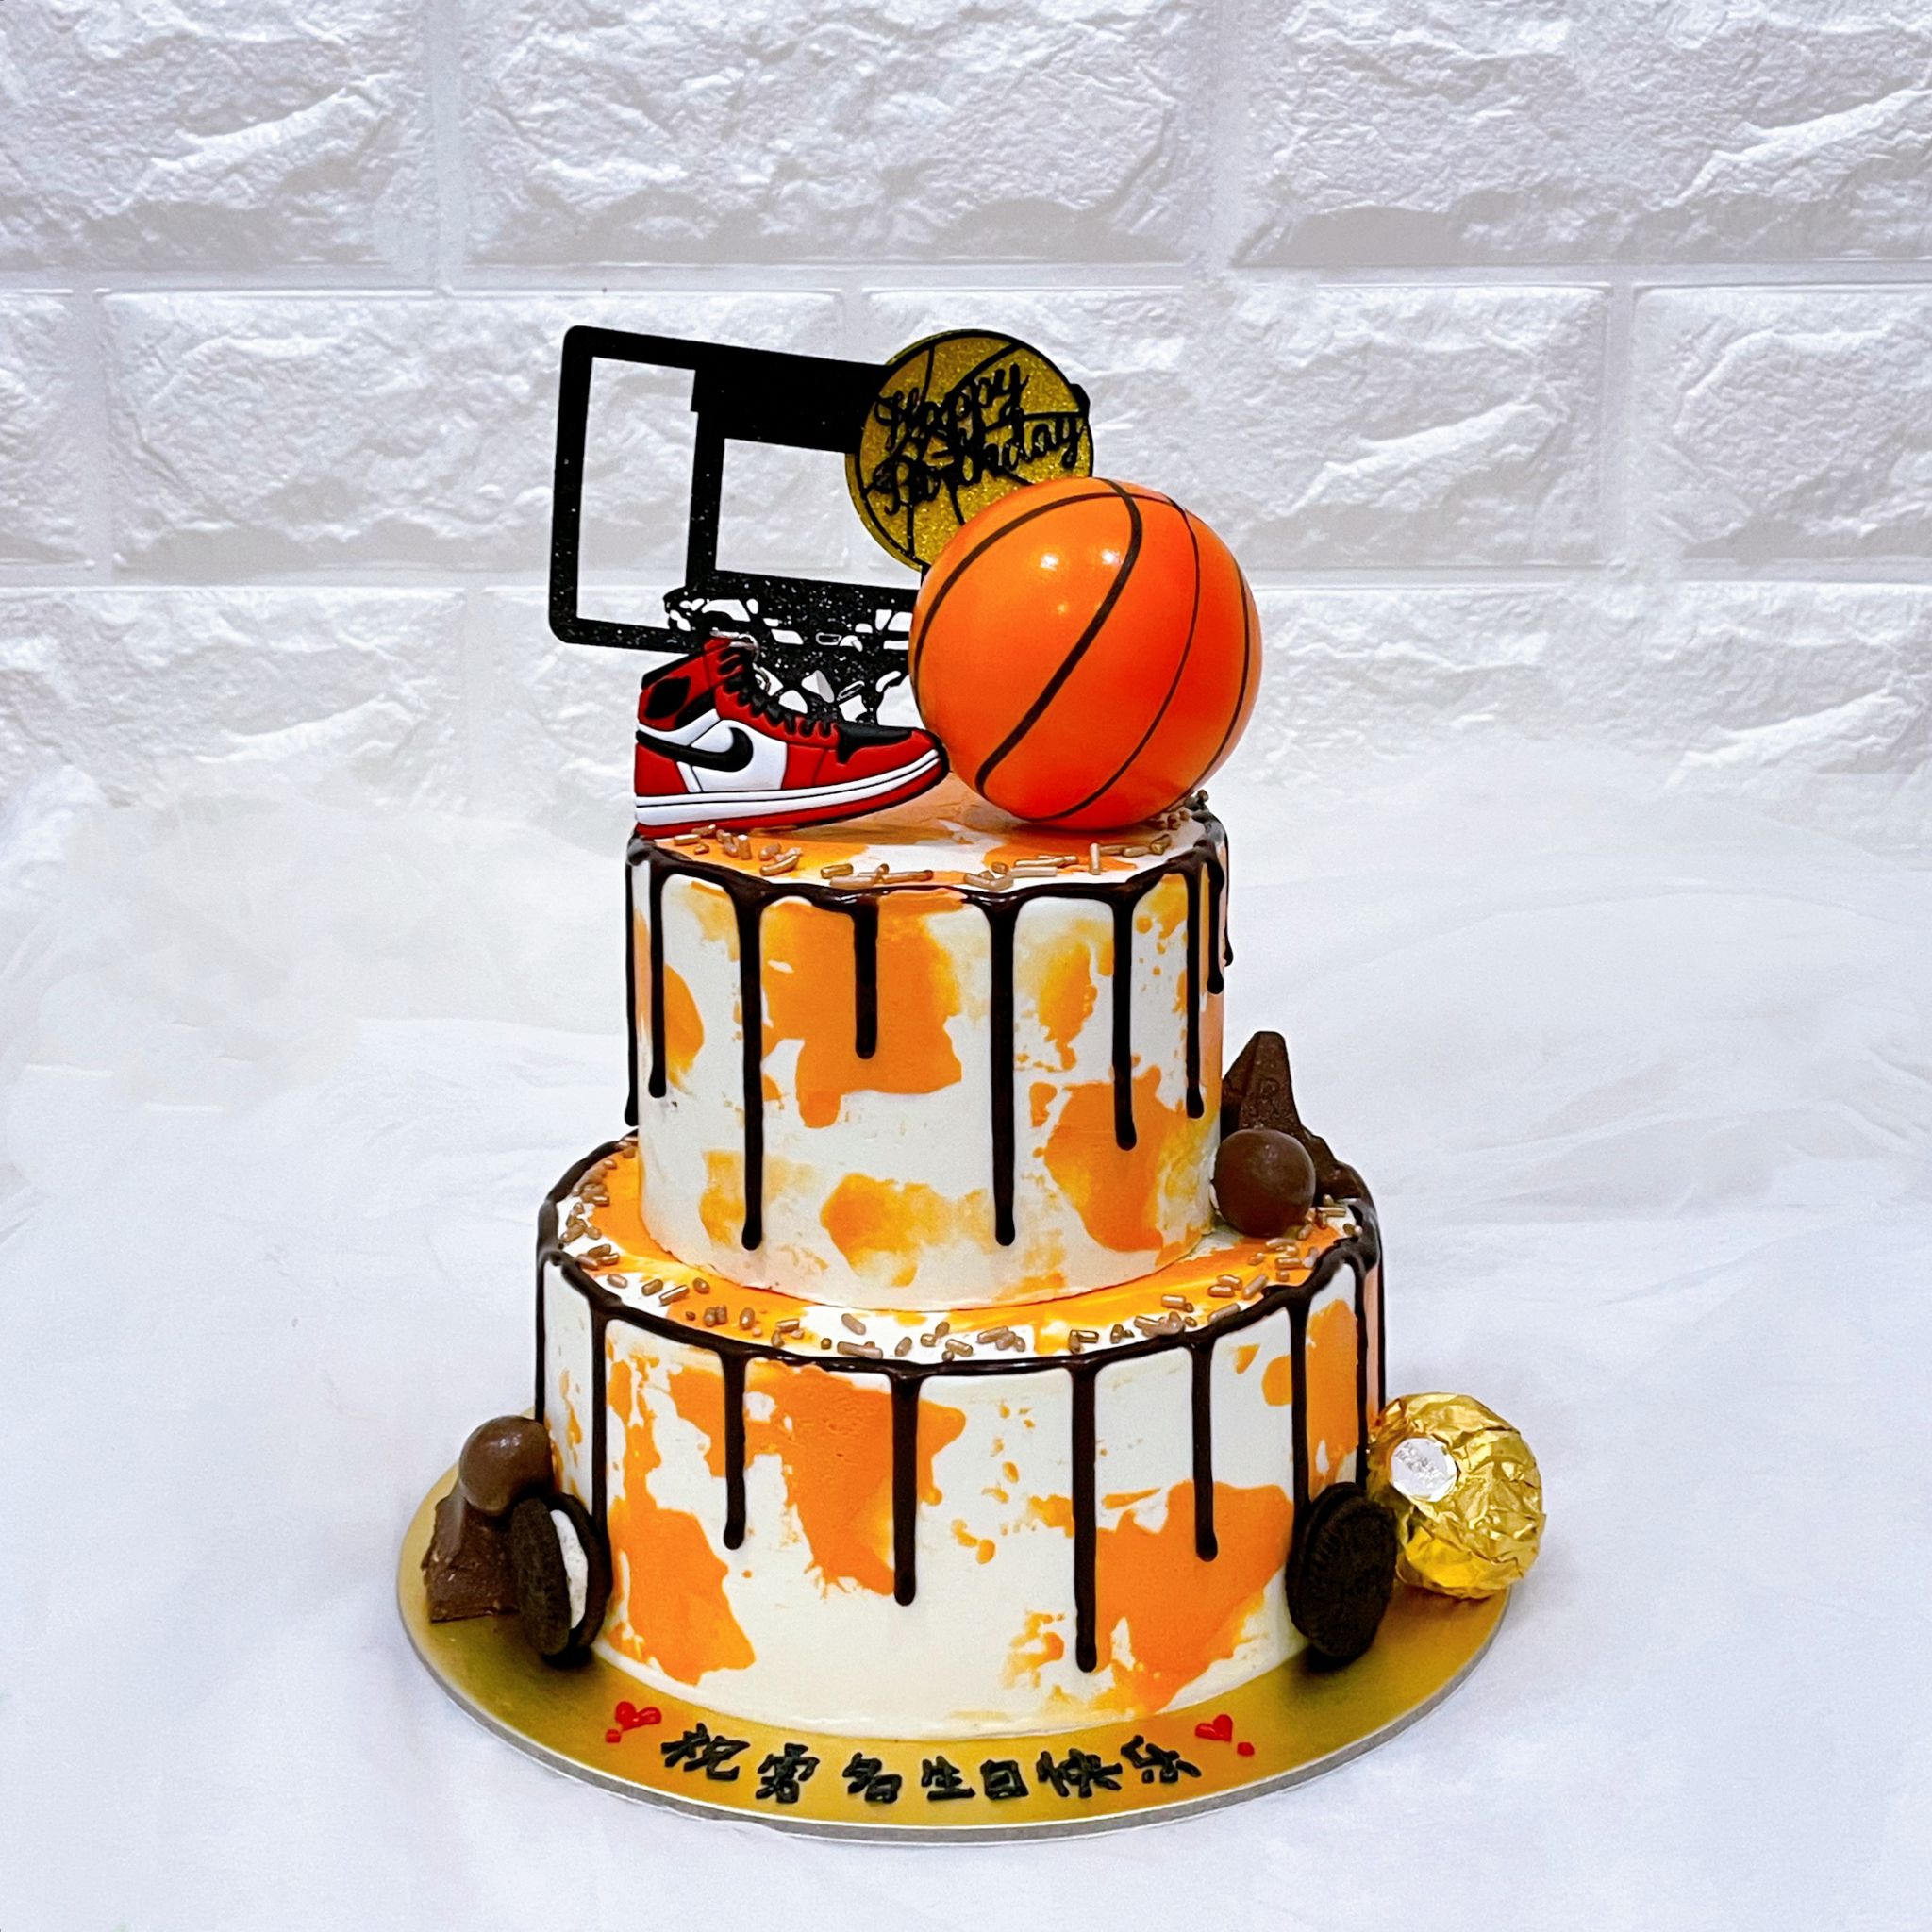 Big Basket, Super Cake- Online Cake delivery in Noida, Cake Shops with  Midnight & Same Day Delivery